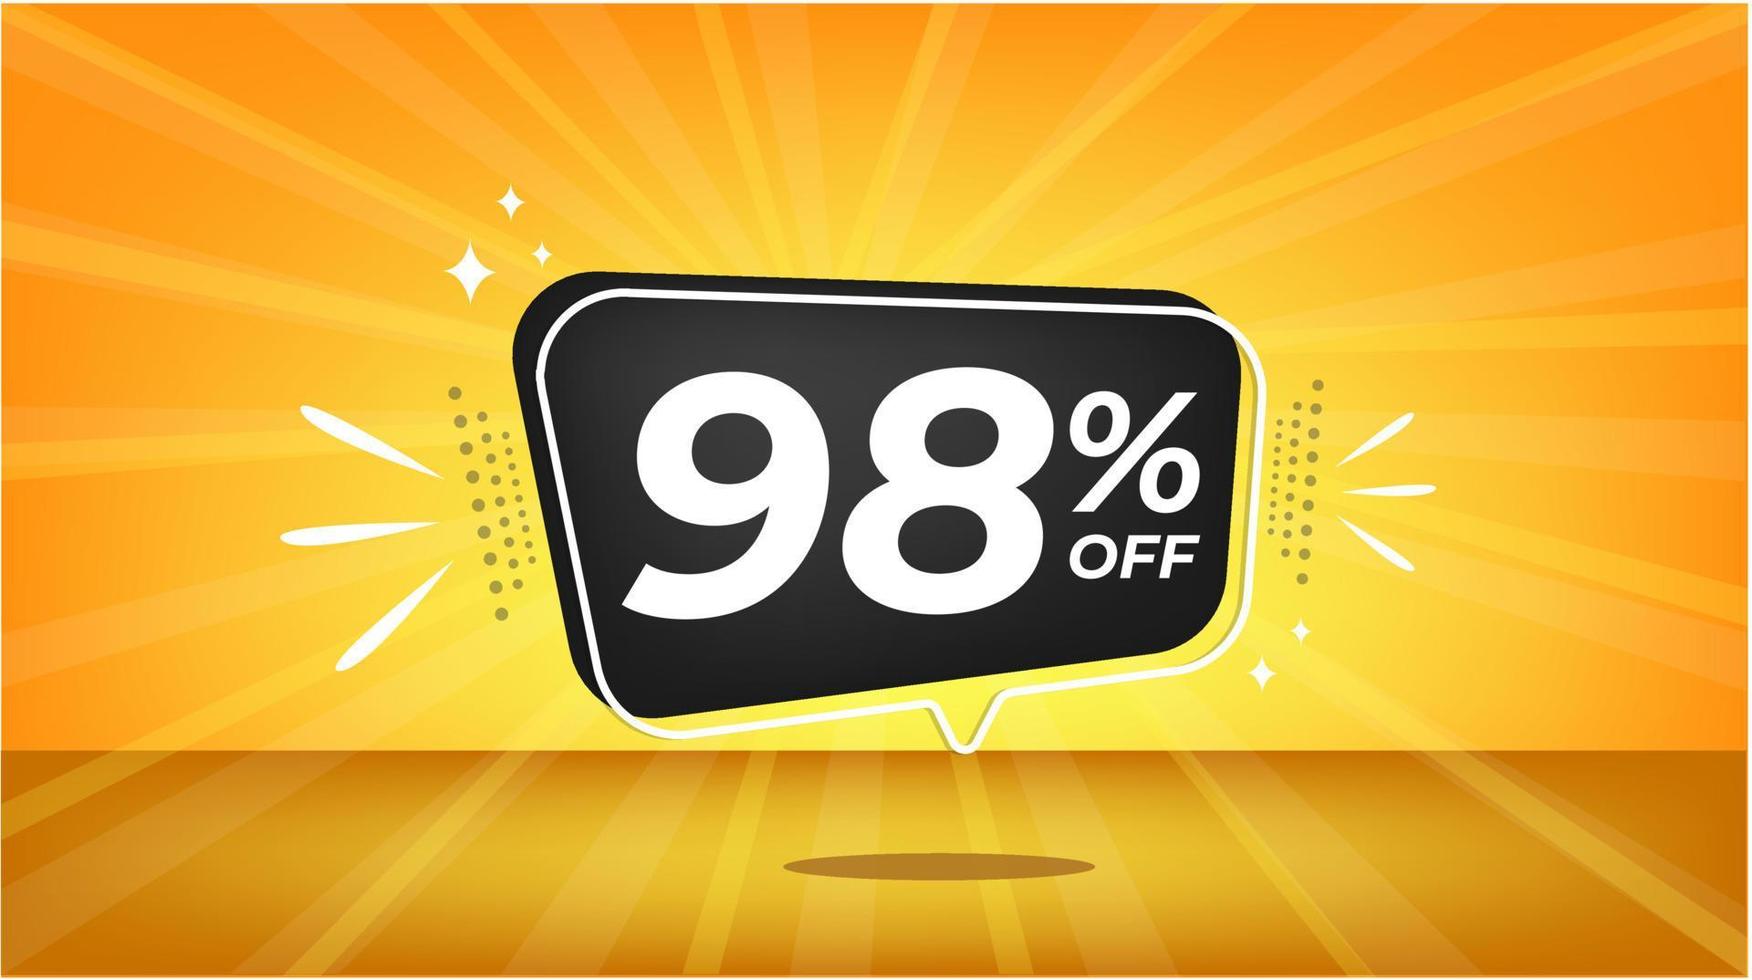 98 percent off. Yellow banner with ninety-eight percent discount on a black balloon for mega big sales vector